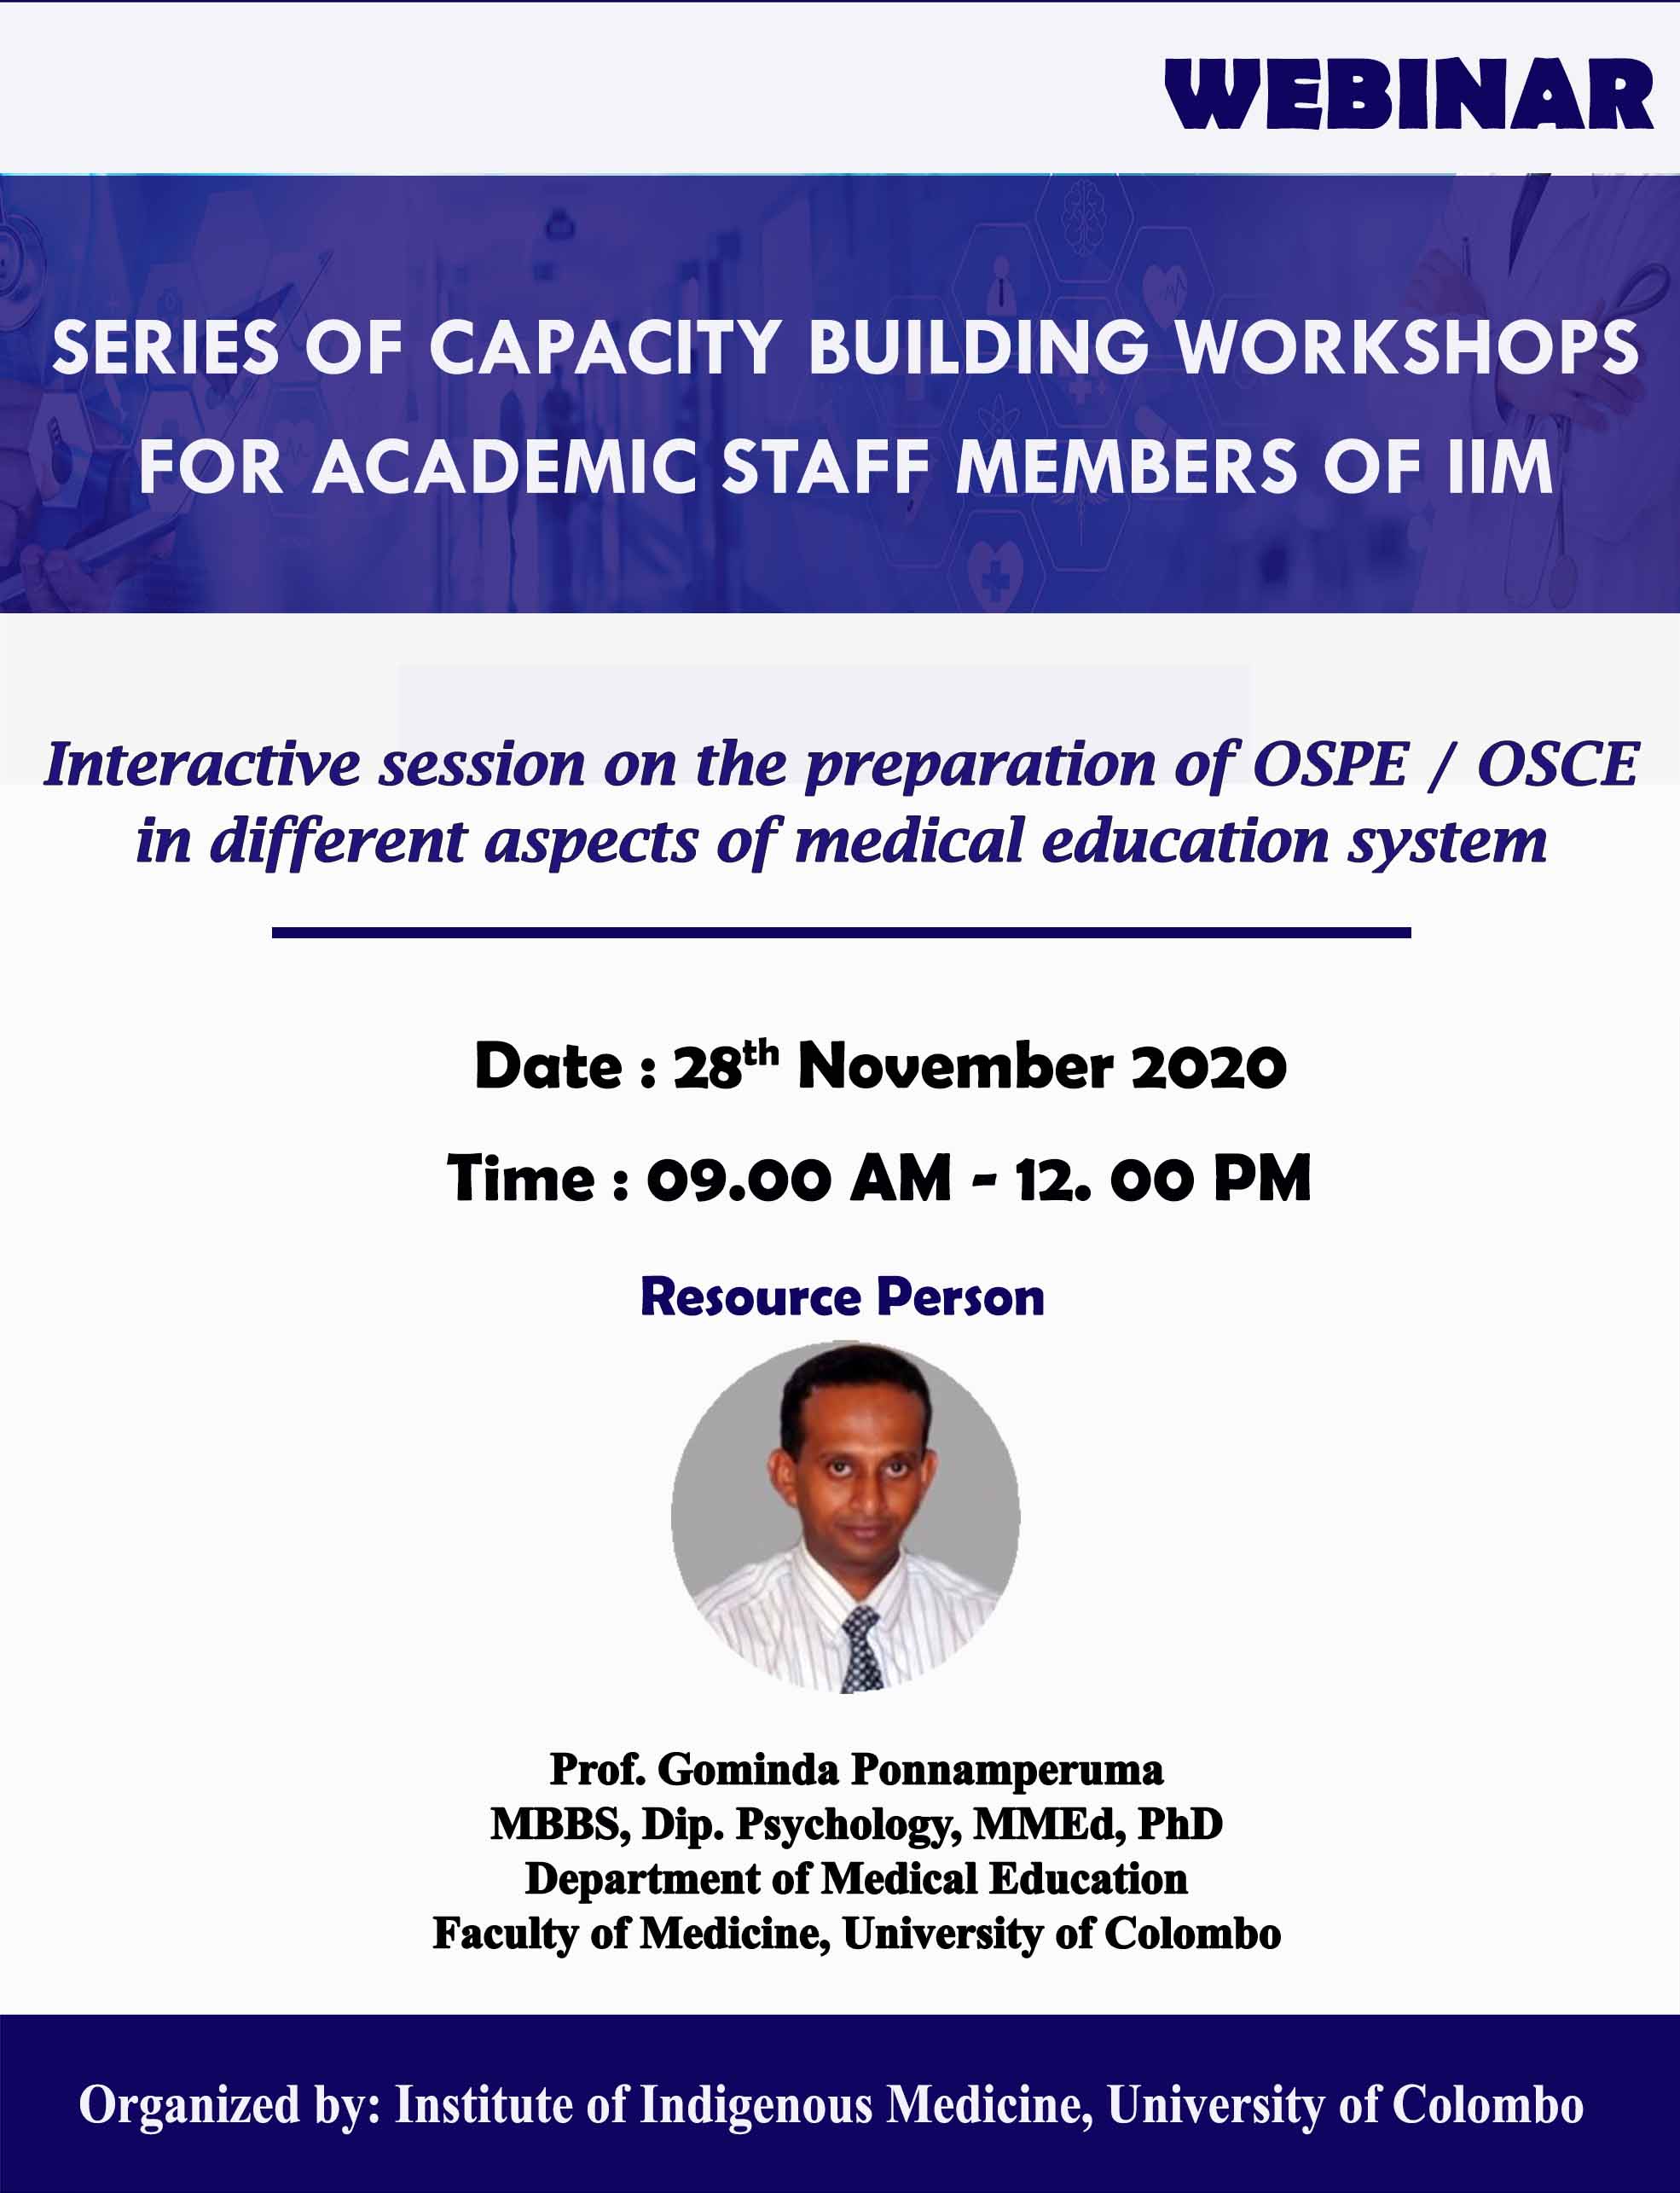 Interactive session on the preparation of OSPE/OSCE in different aspects of medical education system